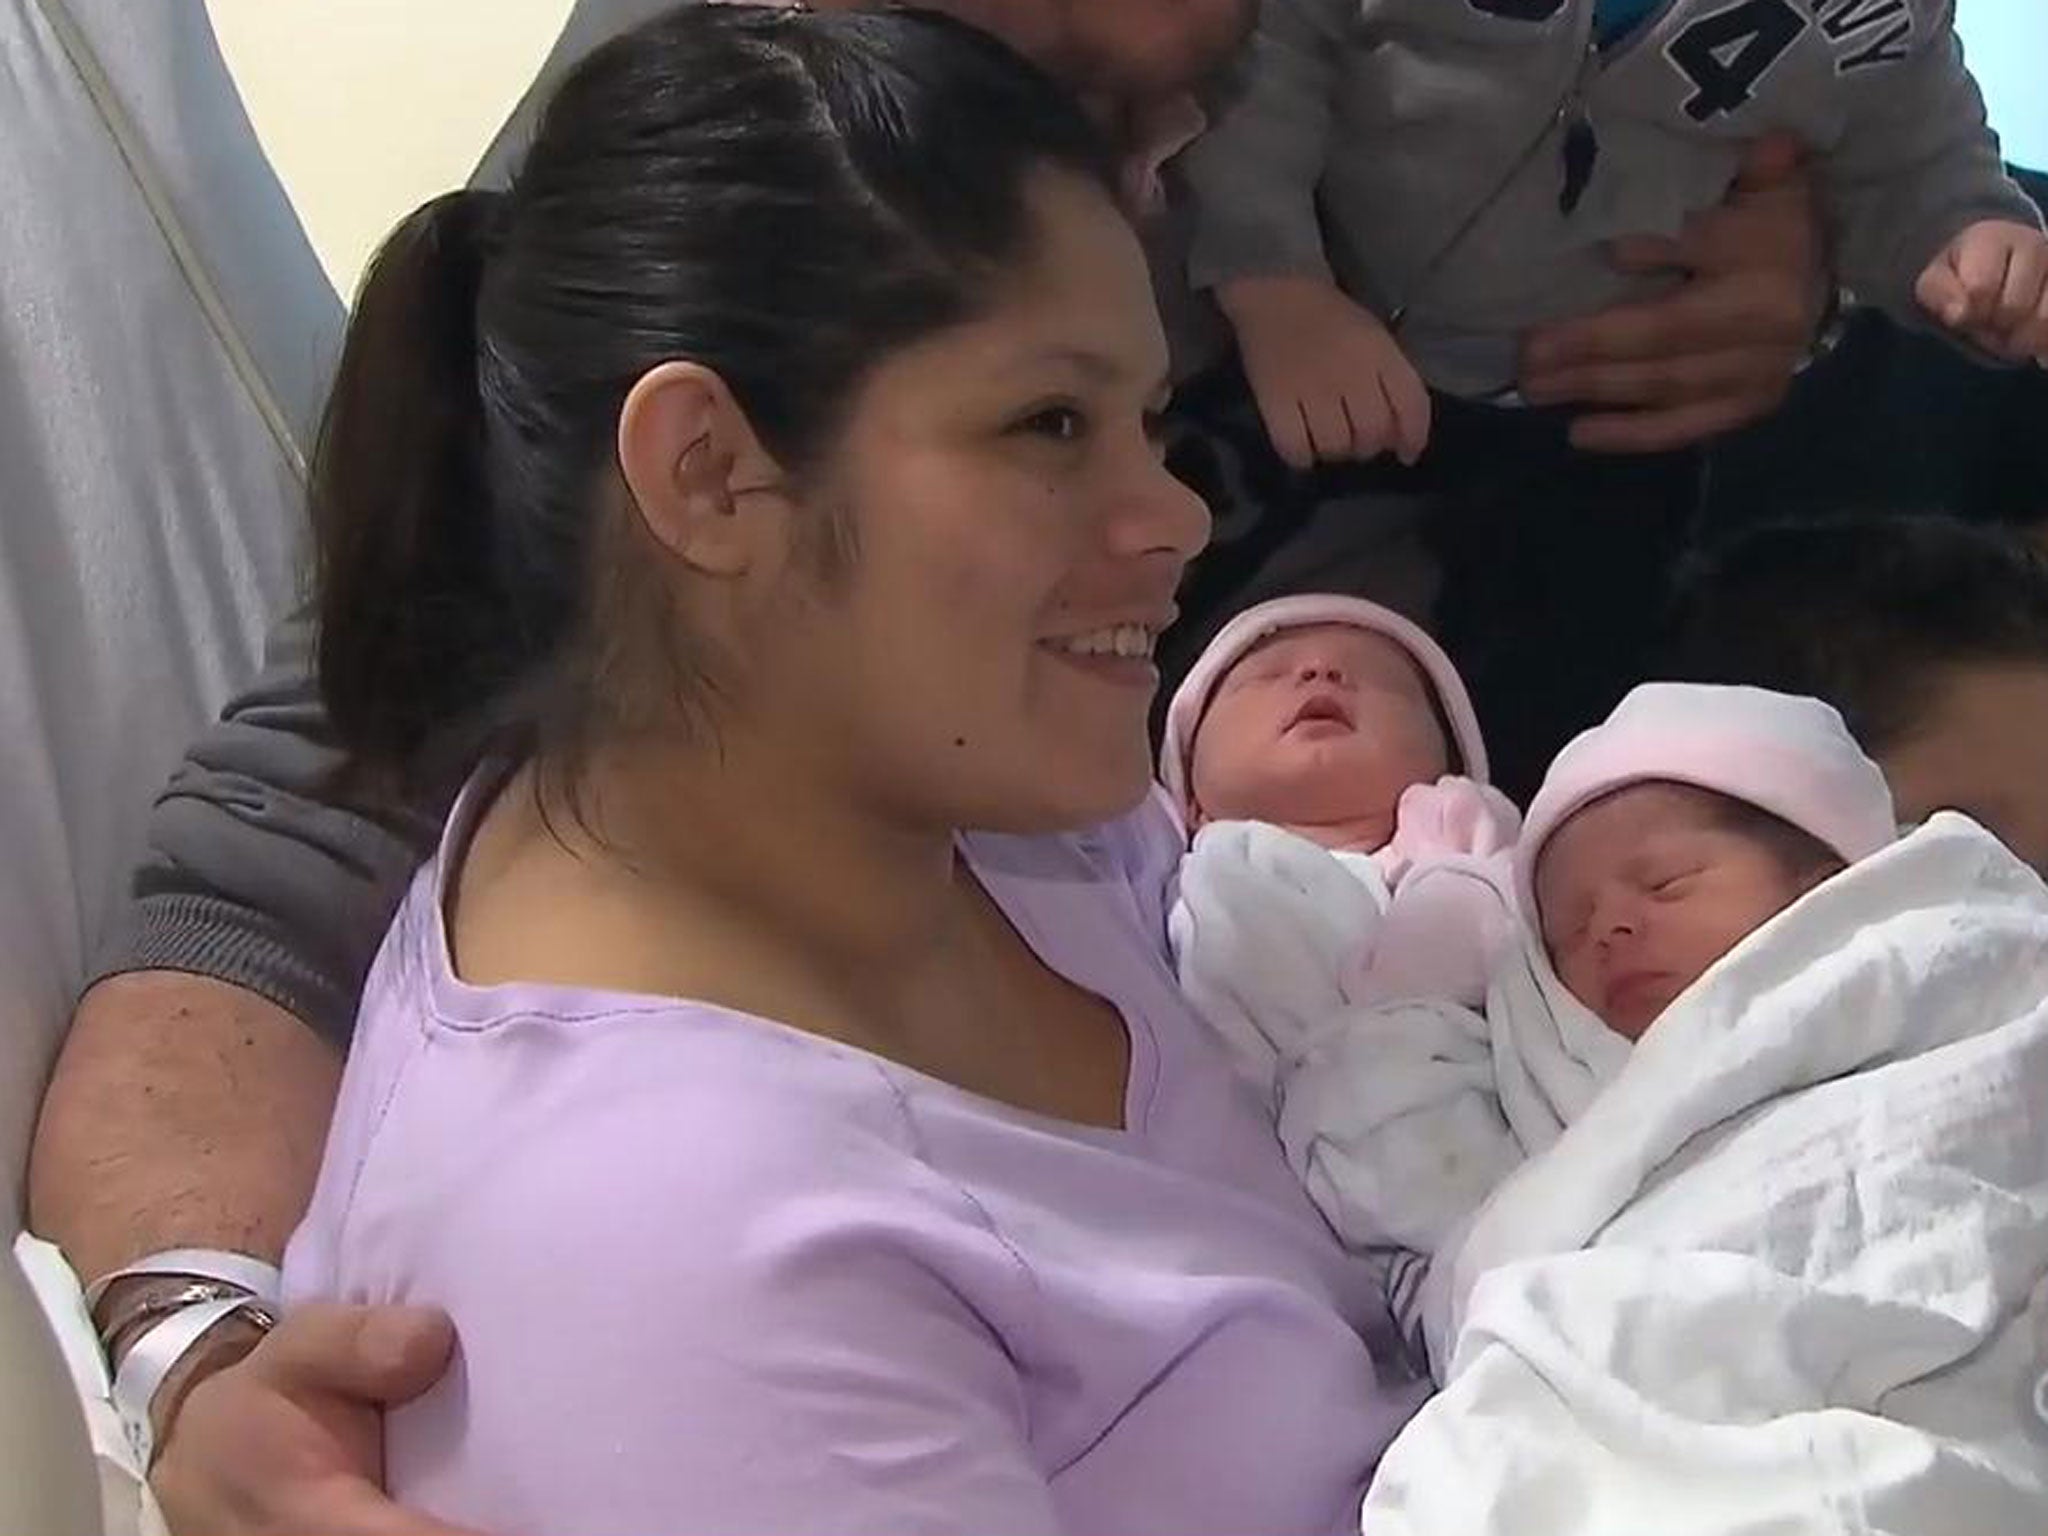 Ms Salgueiro holding her twin daughters, who were born in separate years